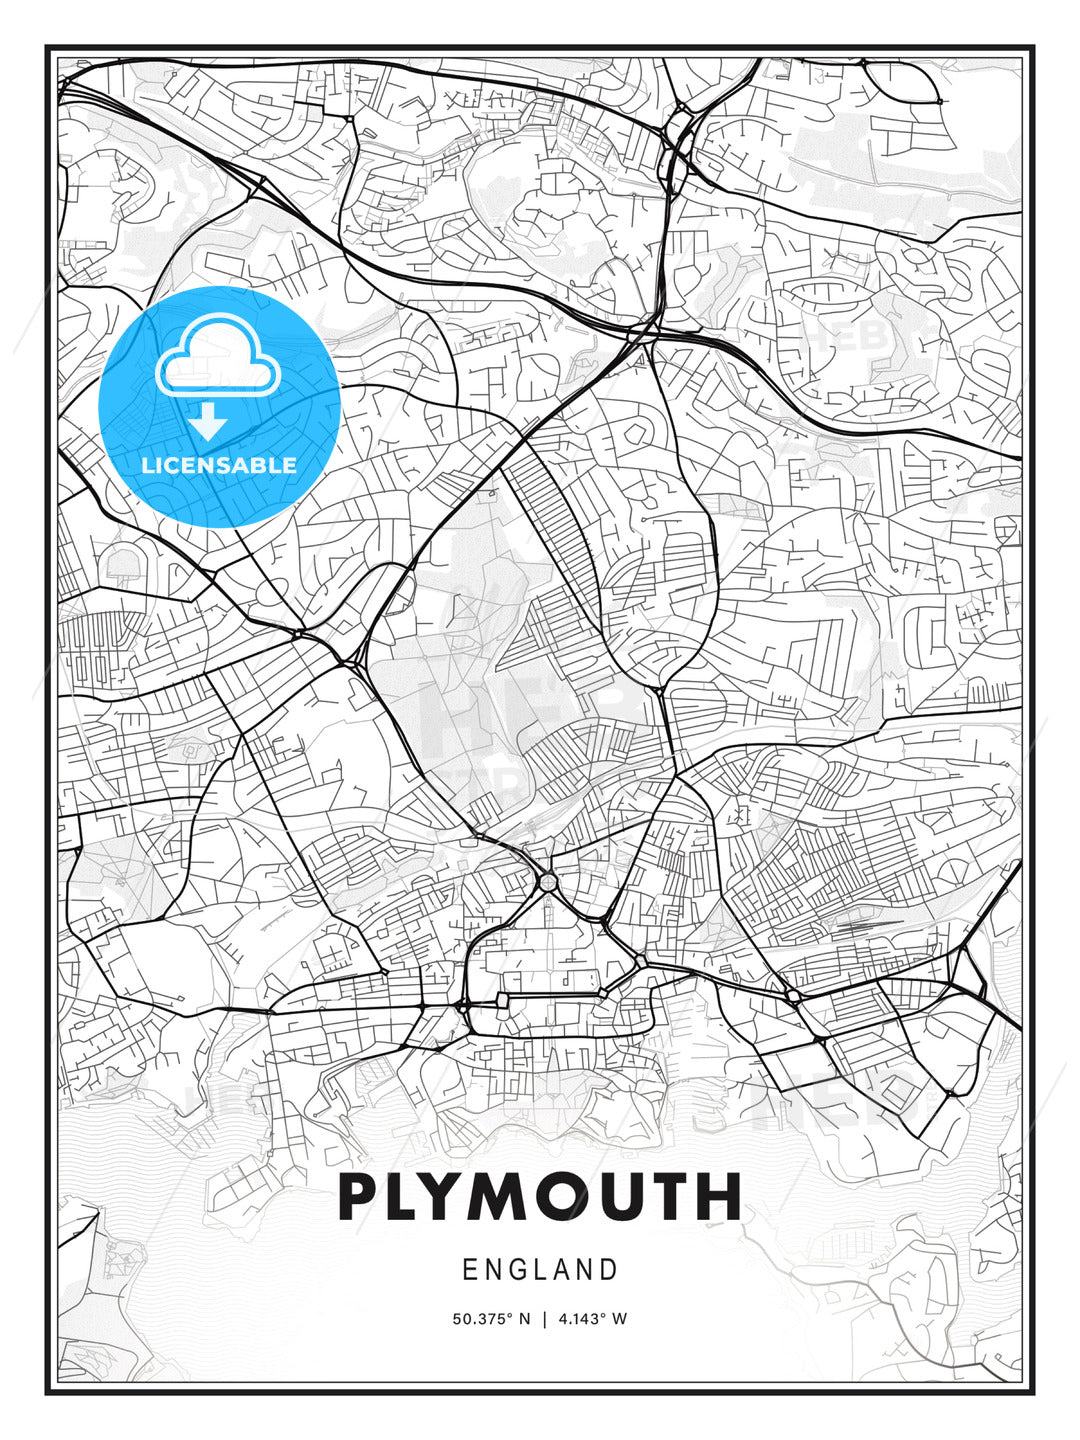 Plymouth, England, Modern Print Template in Various Formats - HEBSTREITS Sketches